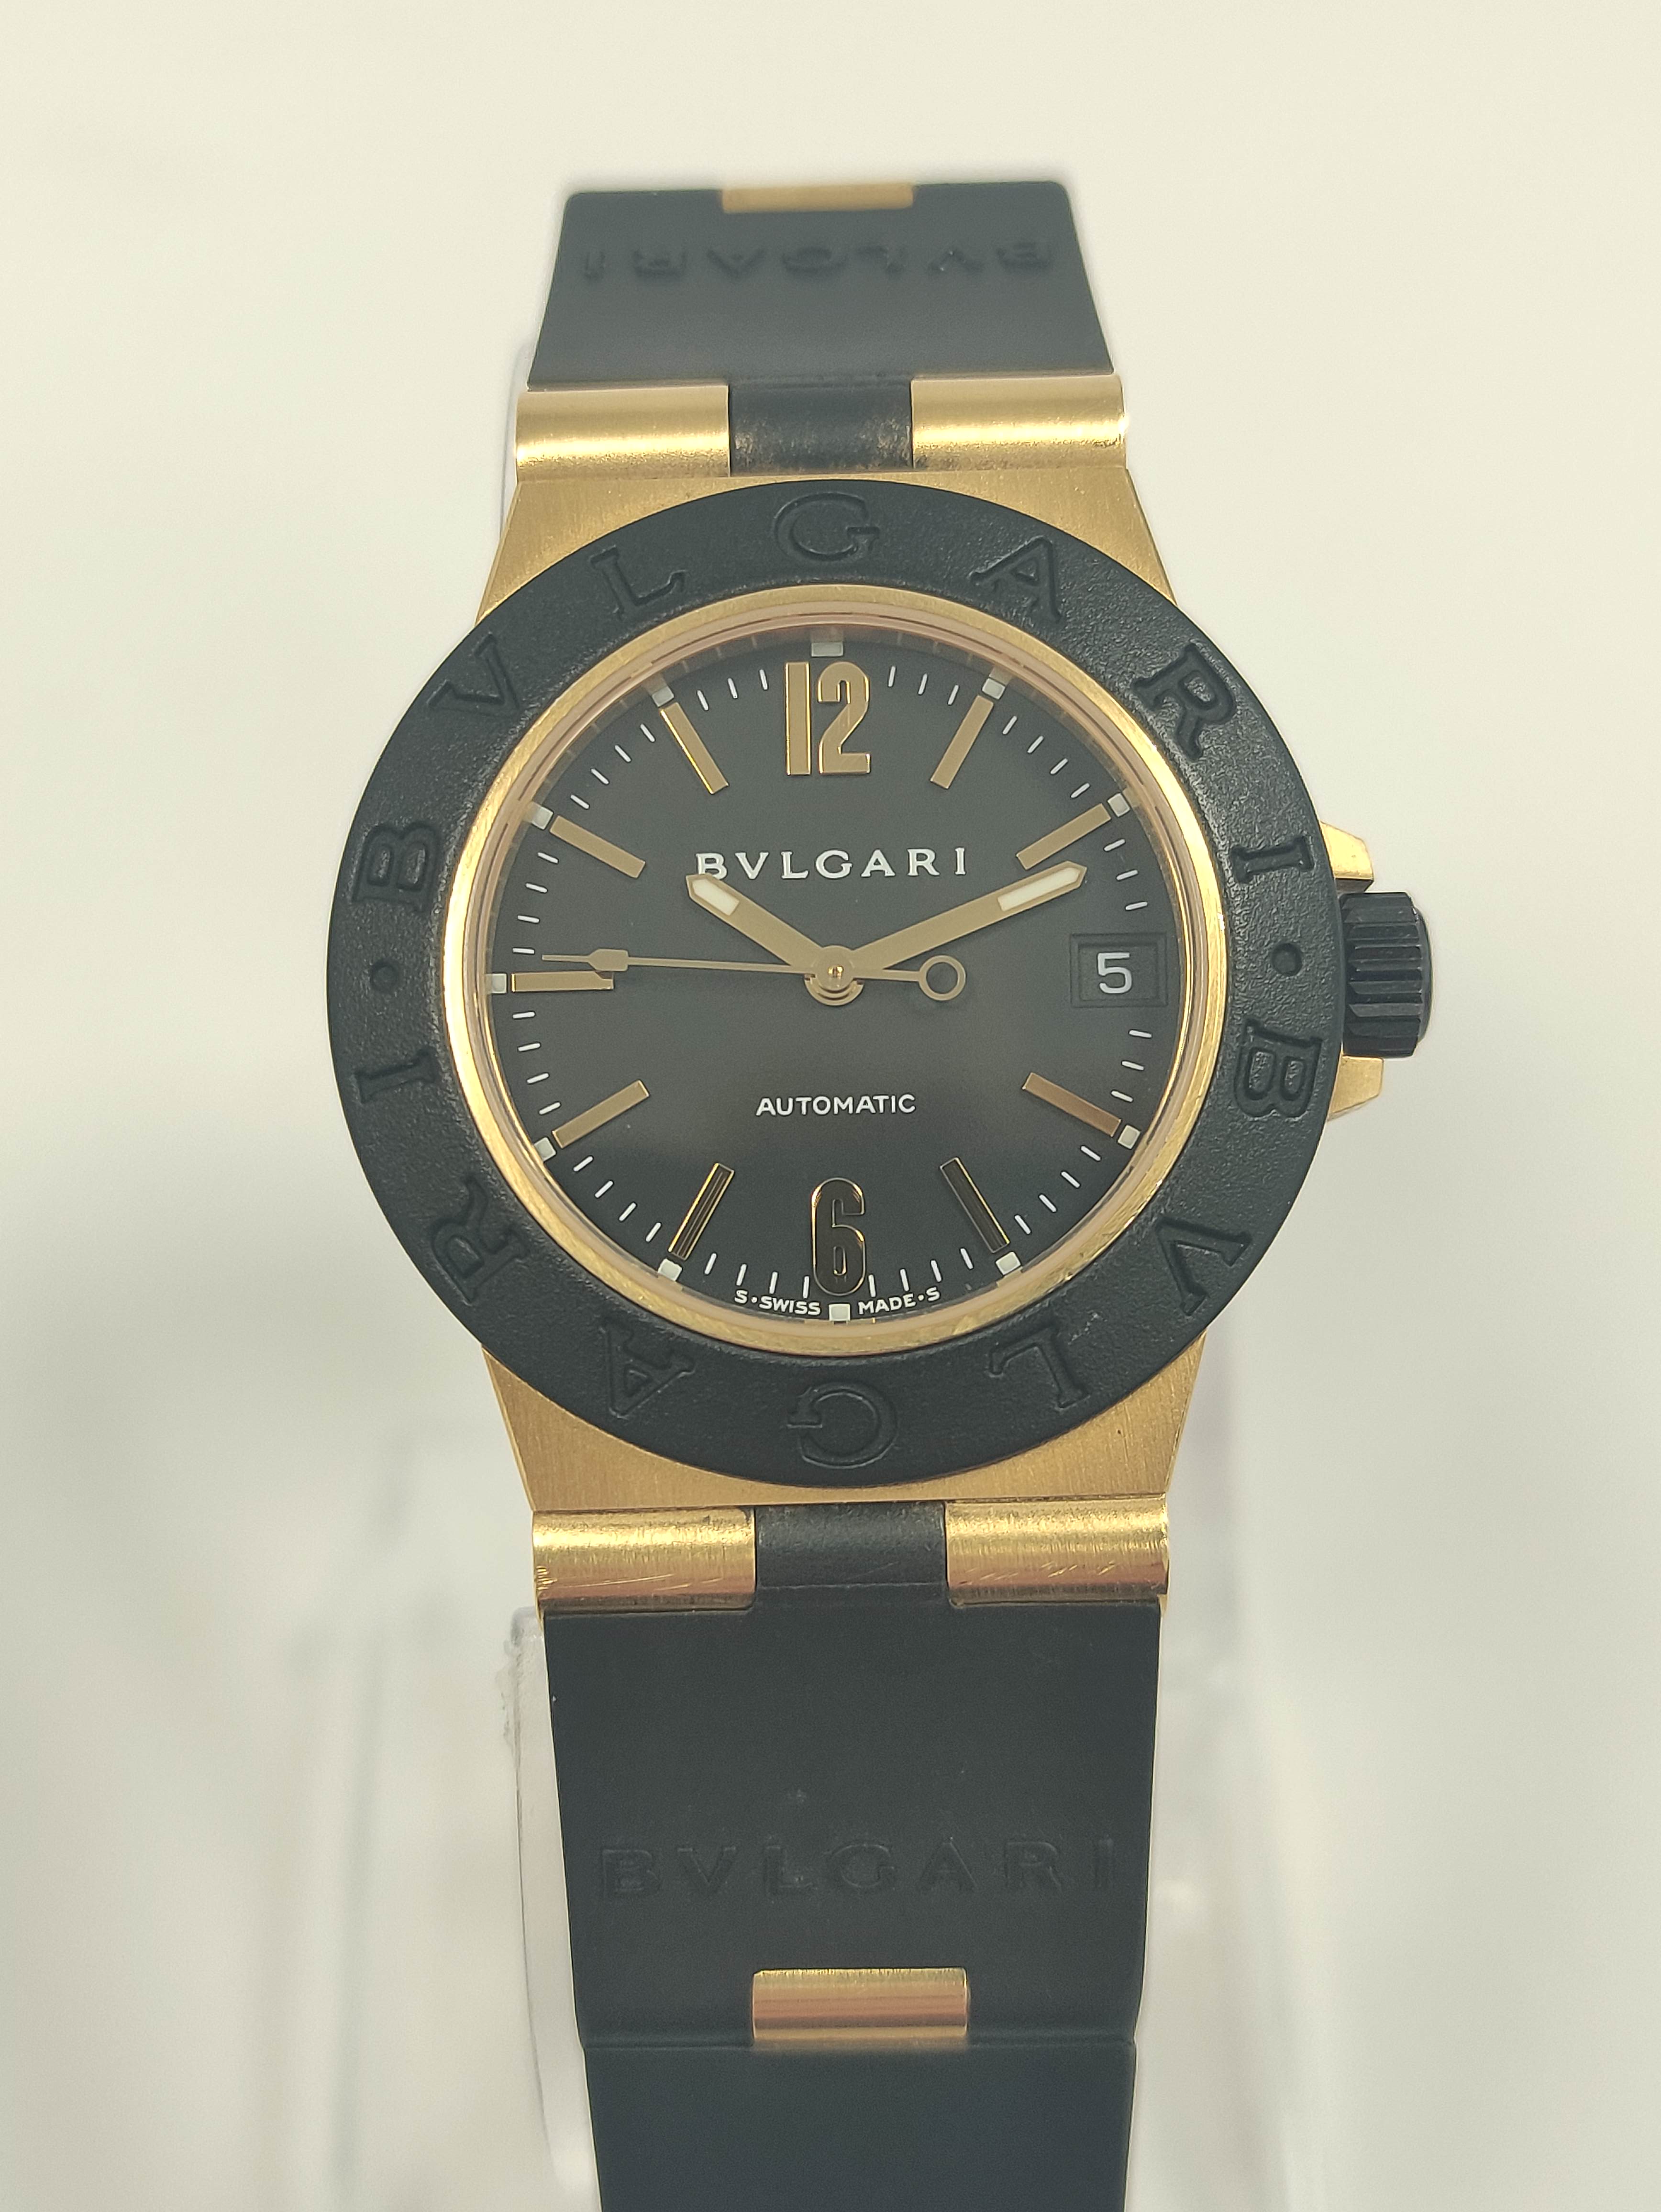 Bulgari AL32 automatic watch, 18ct gold and butyl, with receipt and other items, in box. - Image 4 of 8